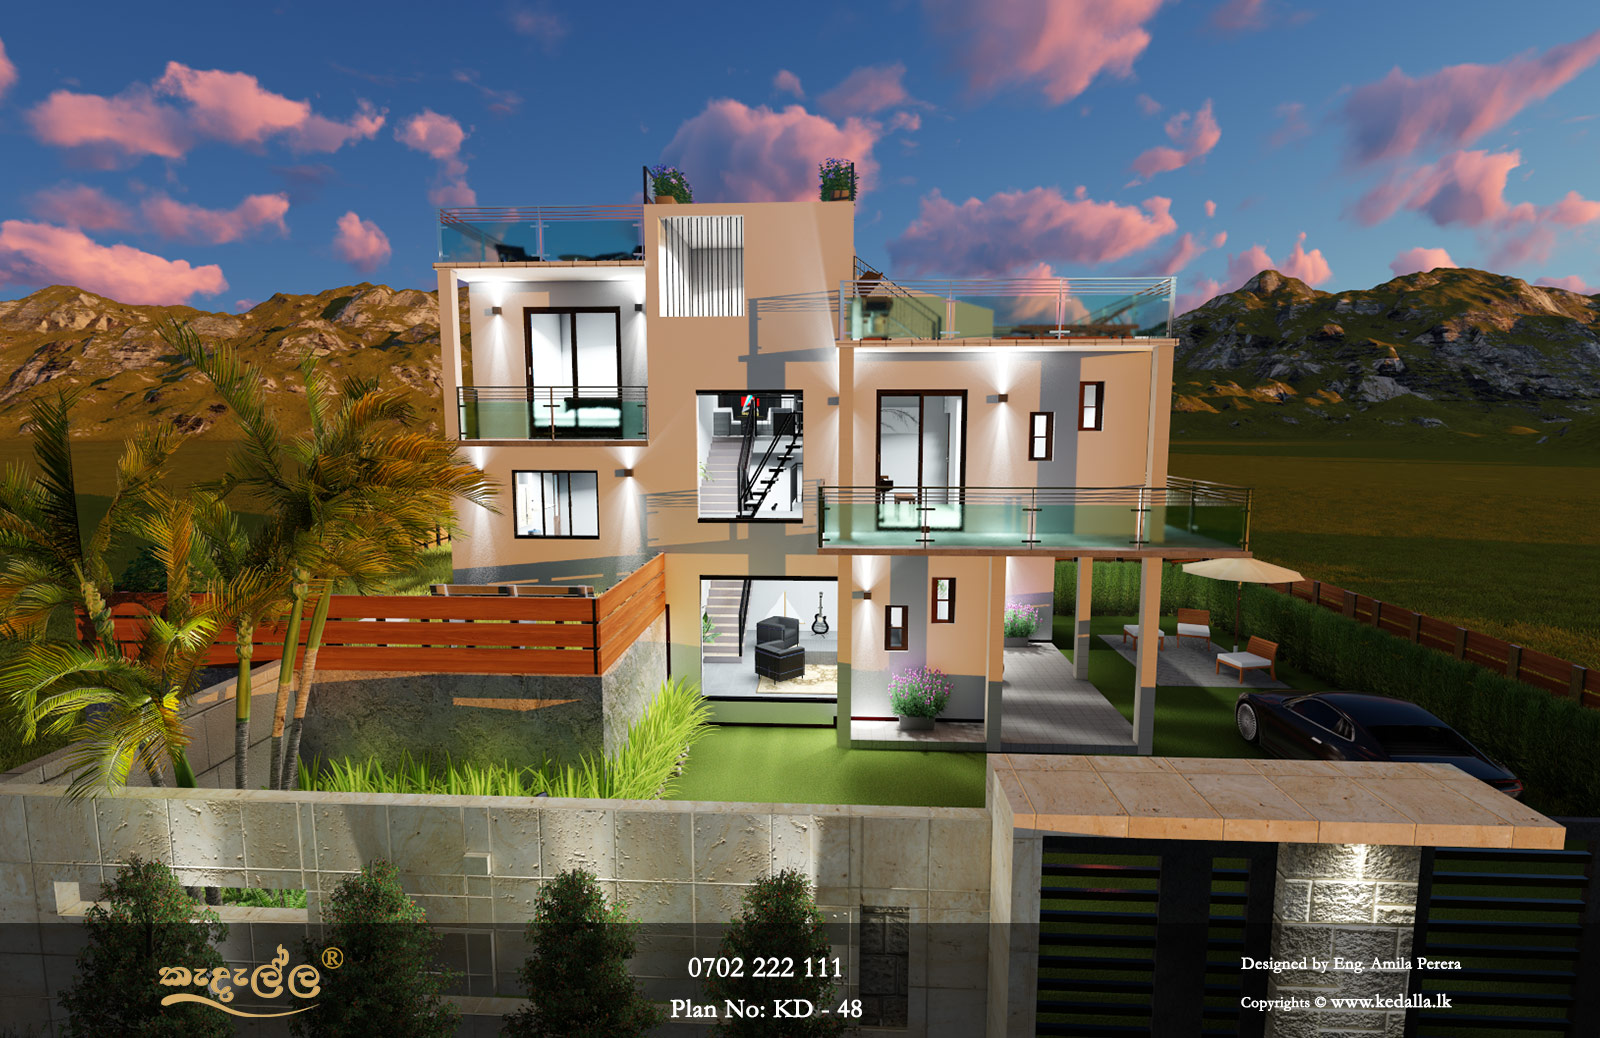 Innovative house designs and prices. Spacious house design images, floor plans & layouts of beautiful 2 storey houses